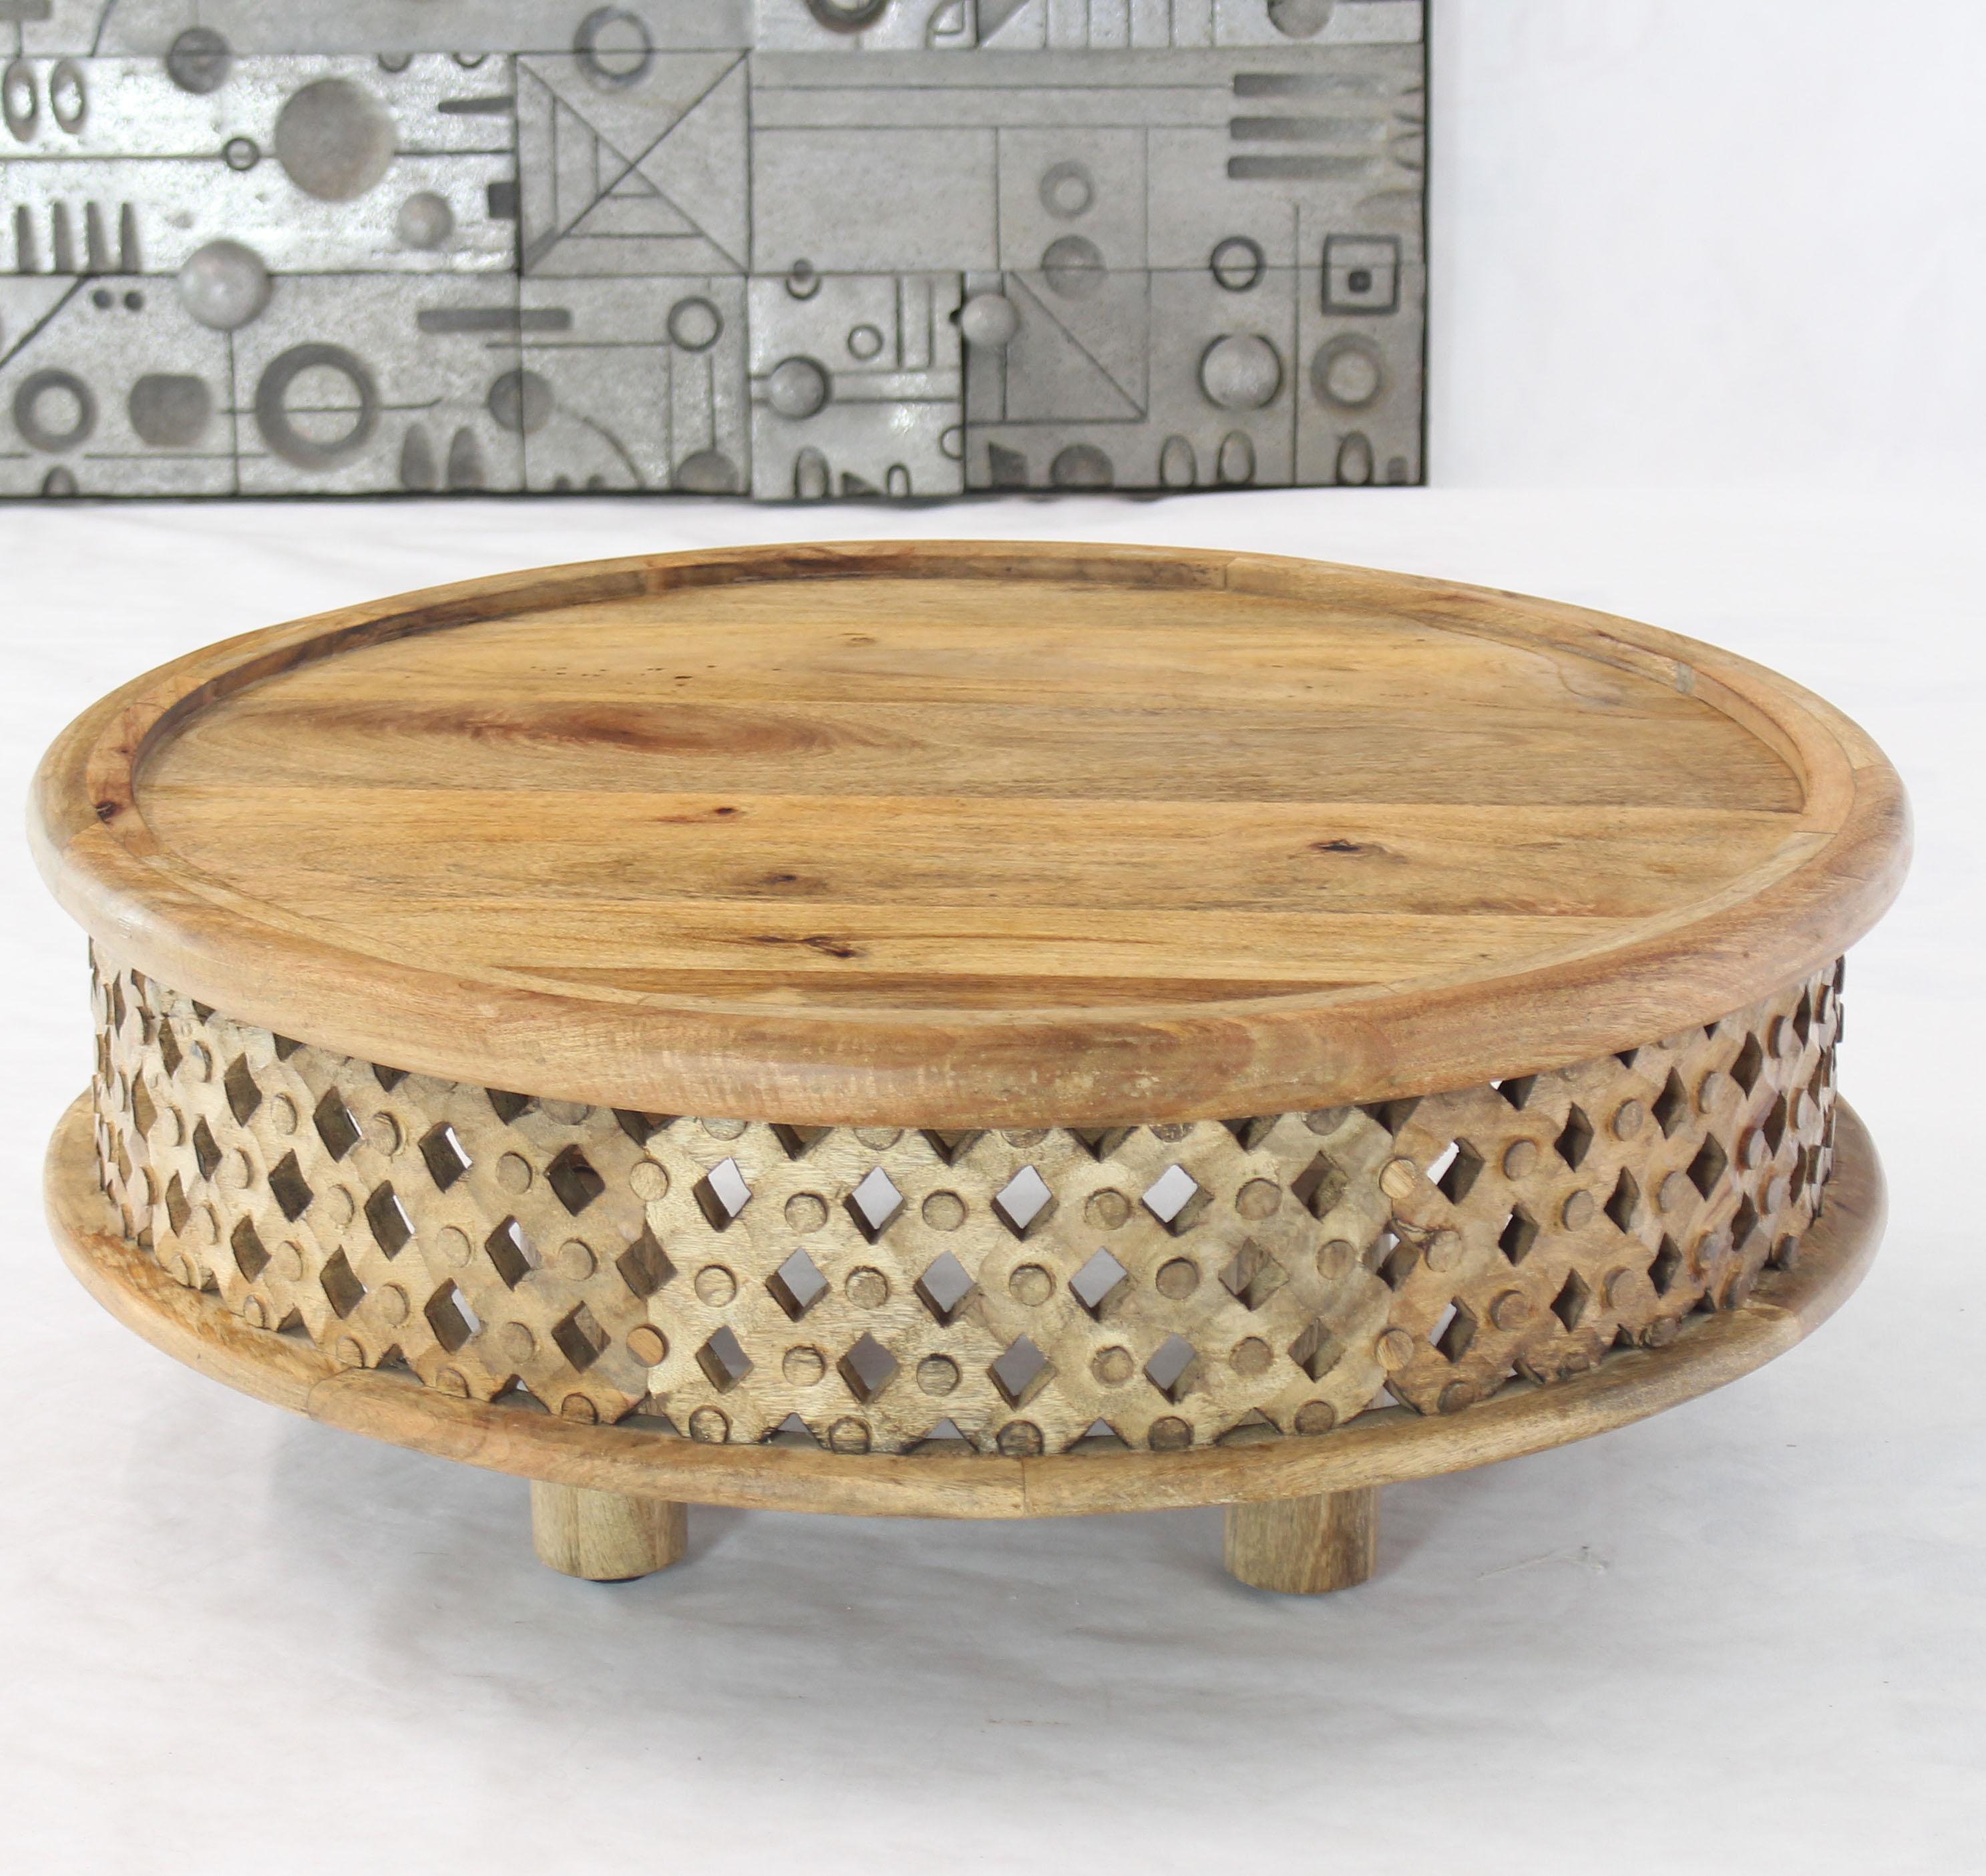 Good quality solid unfinished teak round coffee table.